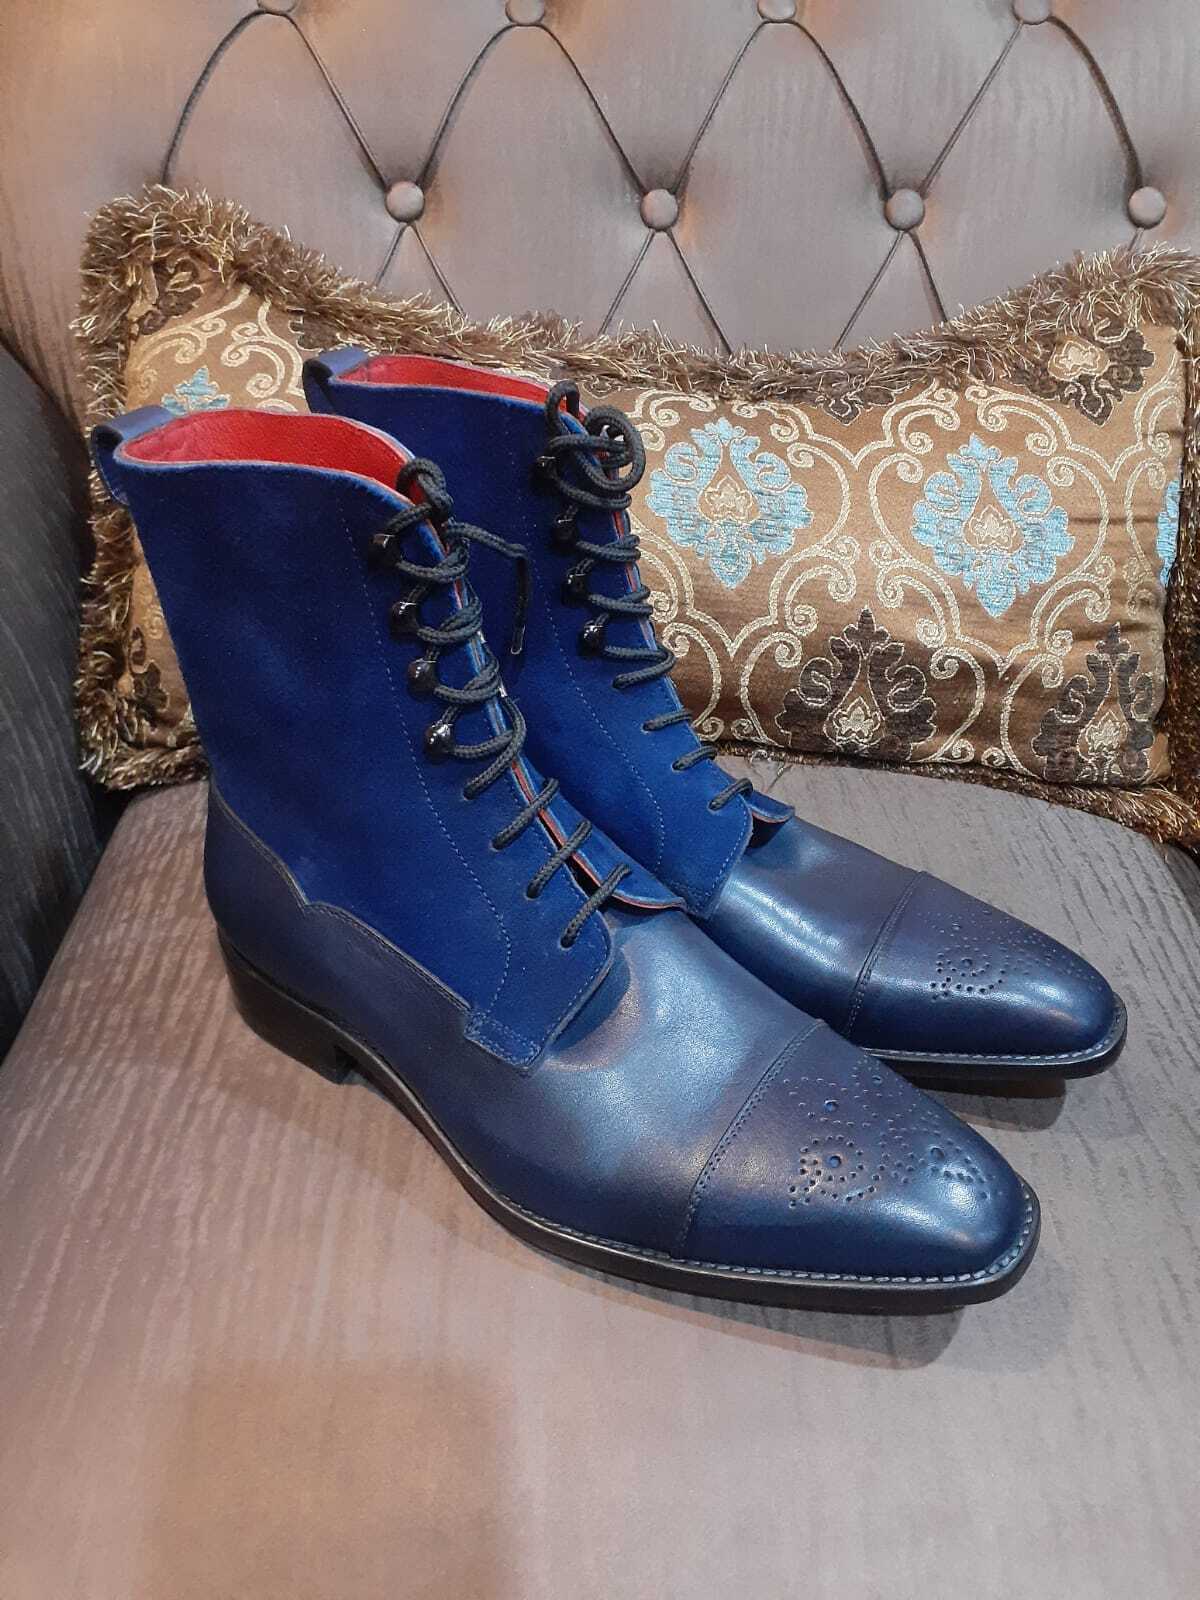 Primary image for Handmade Men's Blue Cowhide Leather Two Tone Round Cap Toe Lace up Ankle Boots